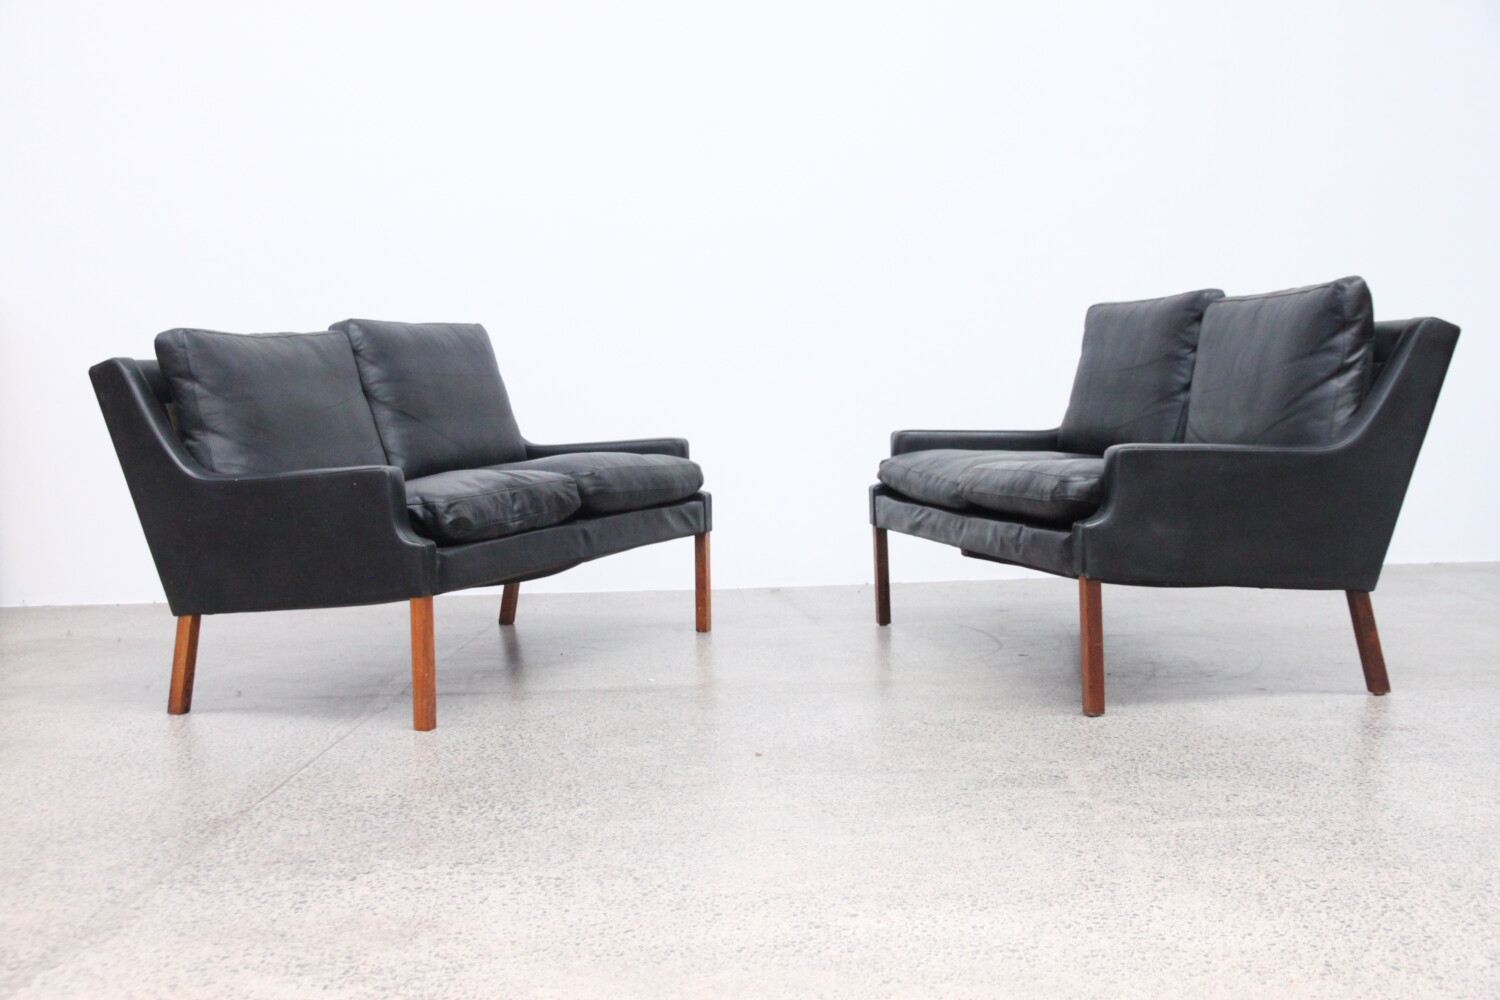 Pair of Two Seater Sofas